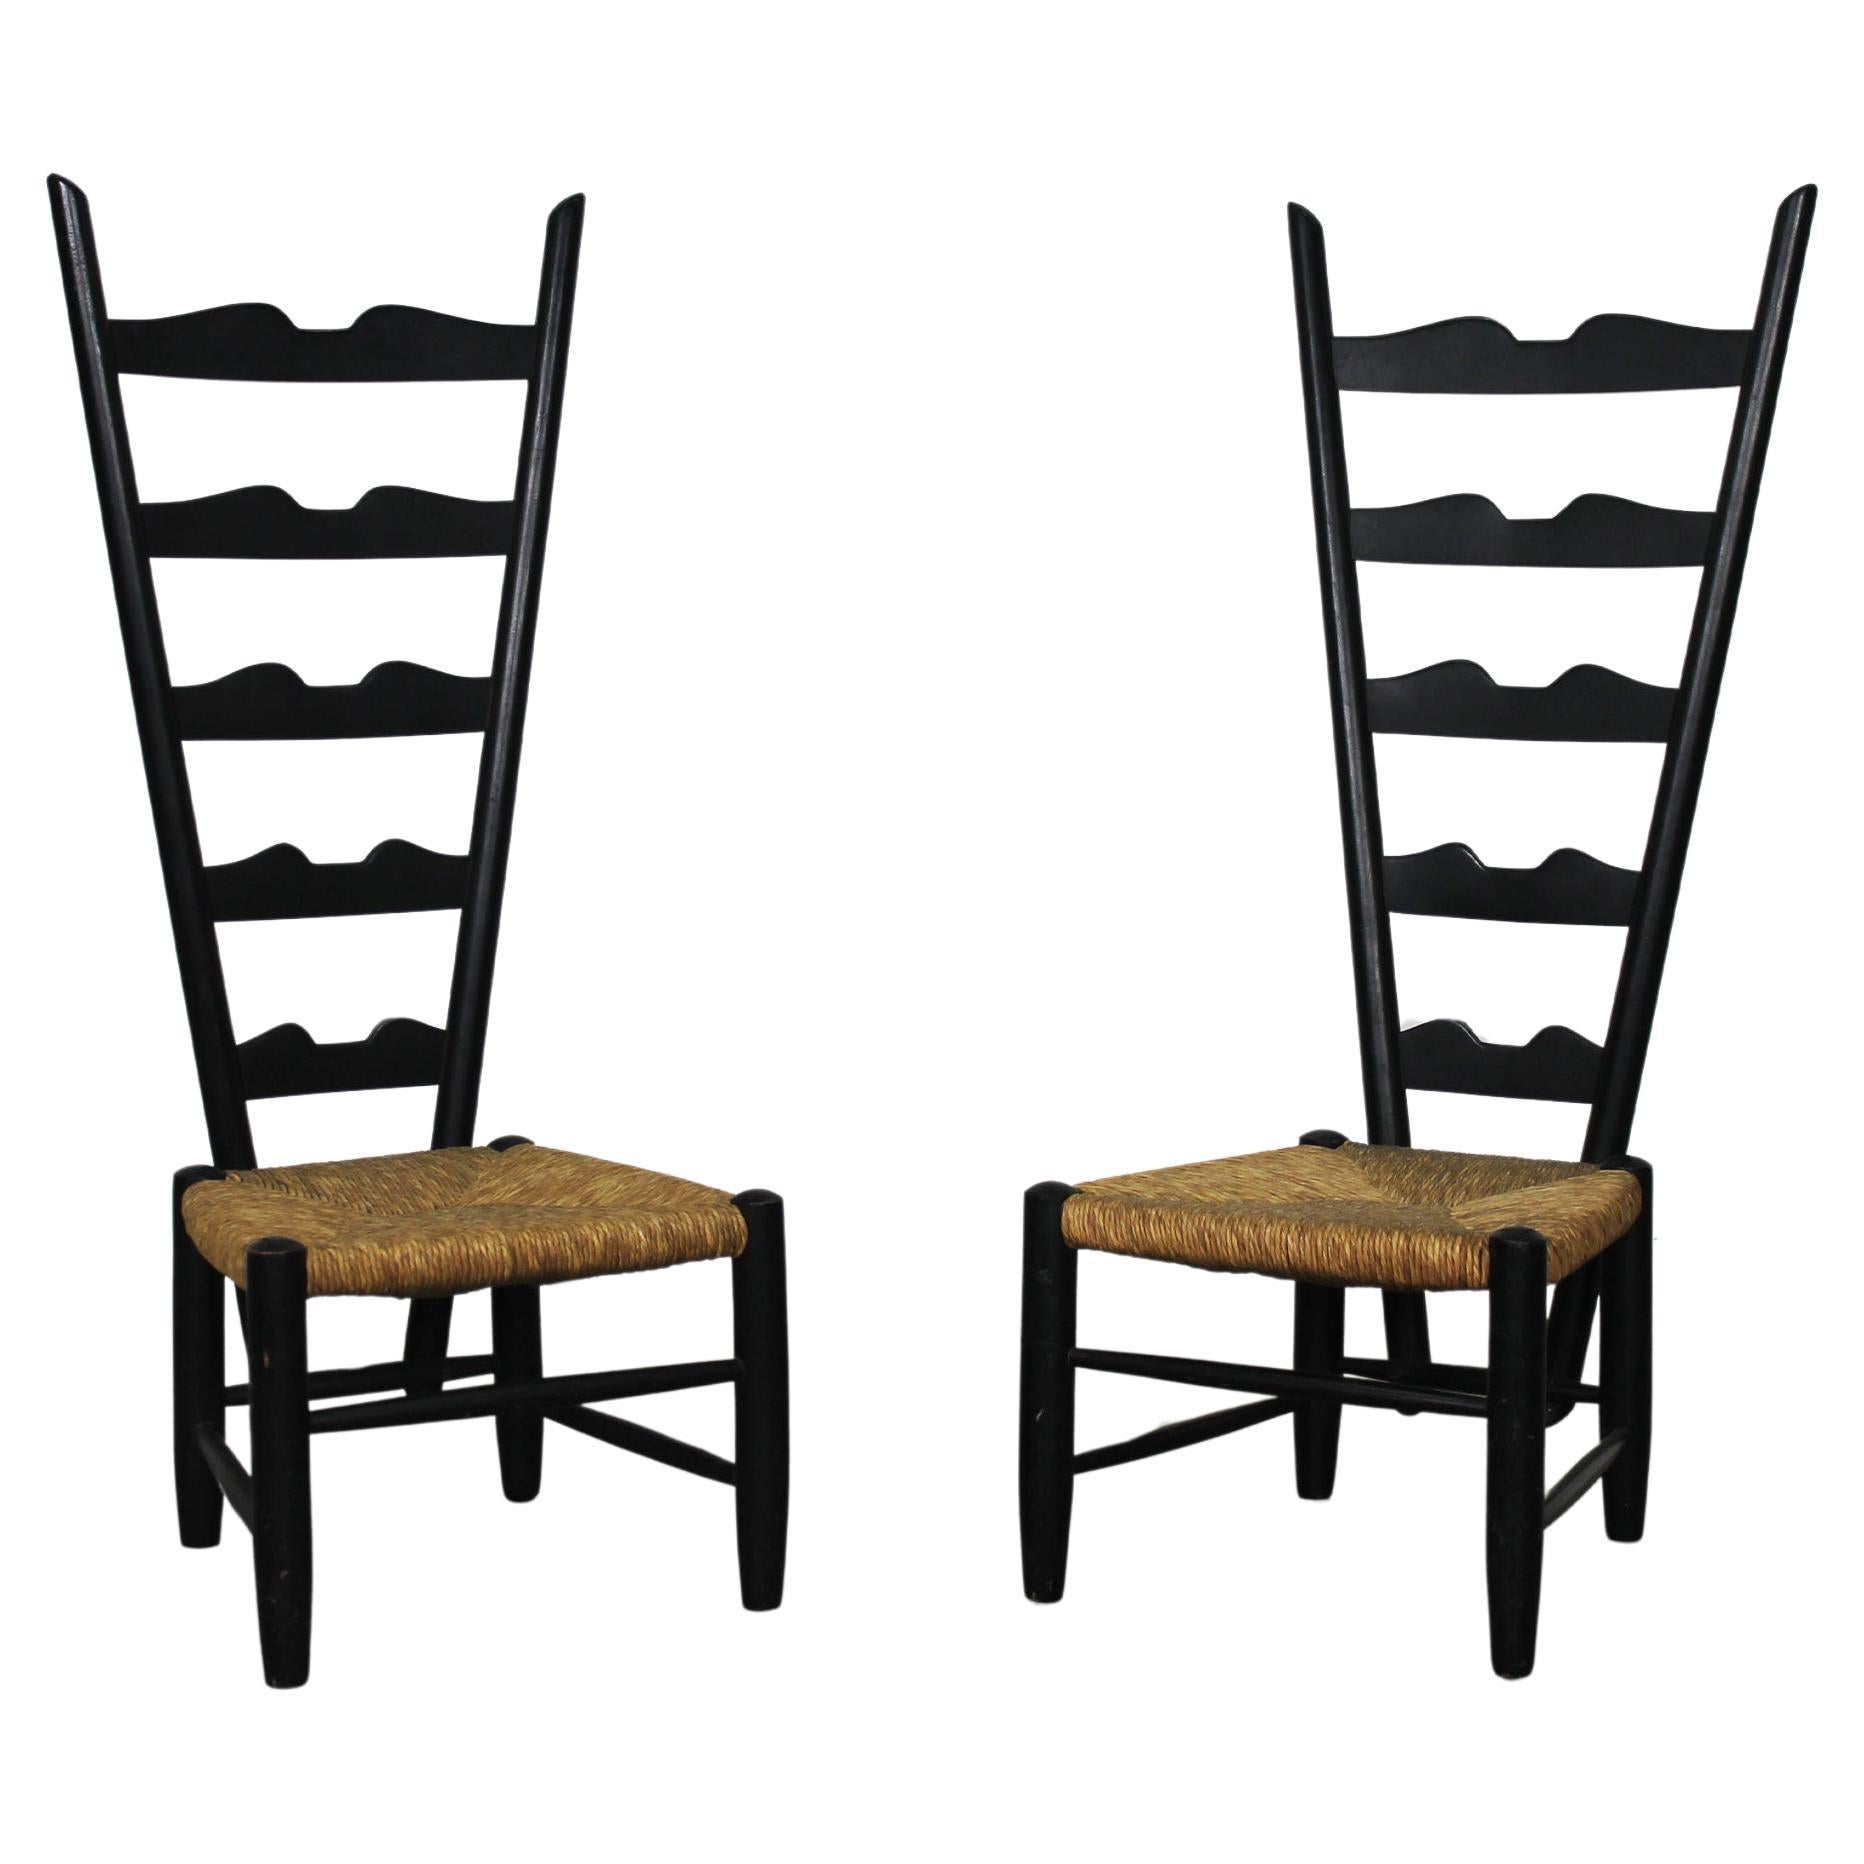 Gio Ponti Set of Two Fireside Chairs in Black Lacquered Wood and Rush 1950s For Sale